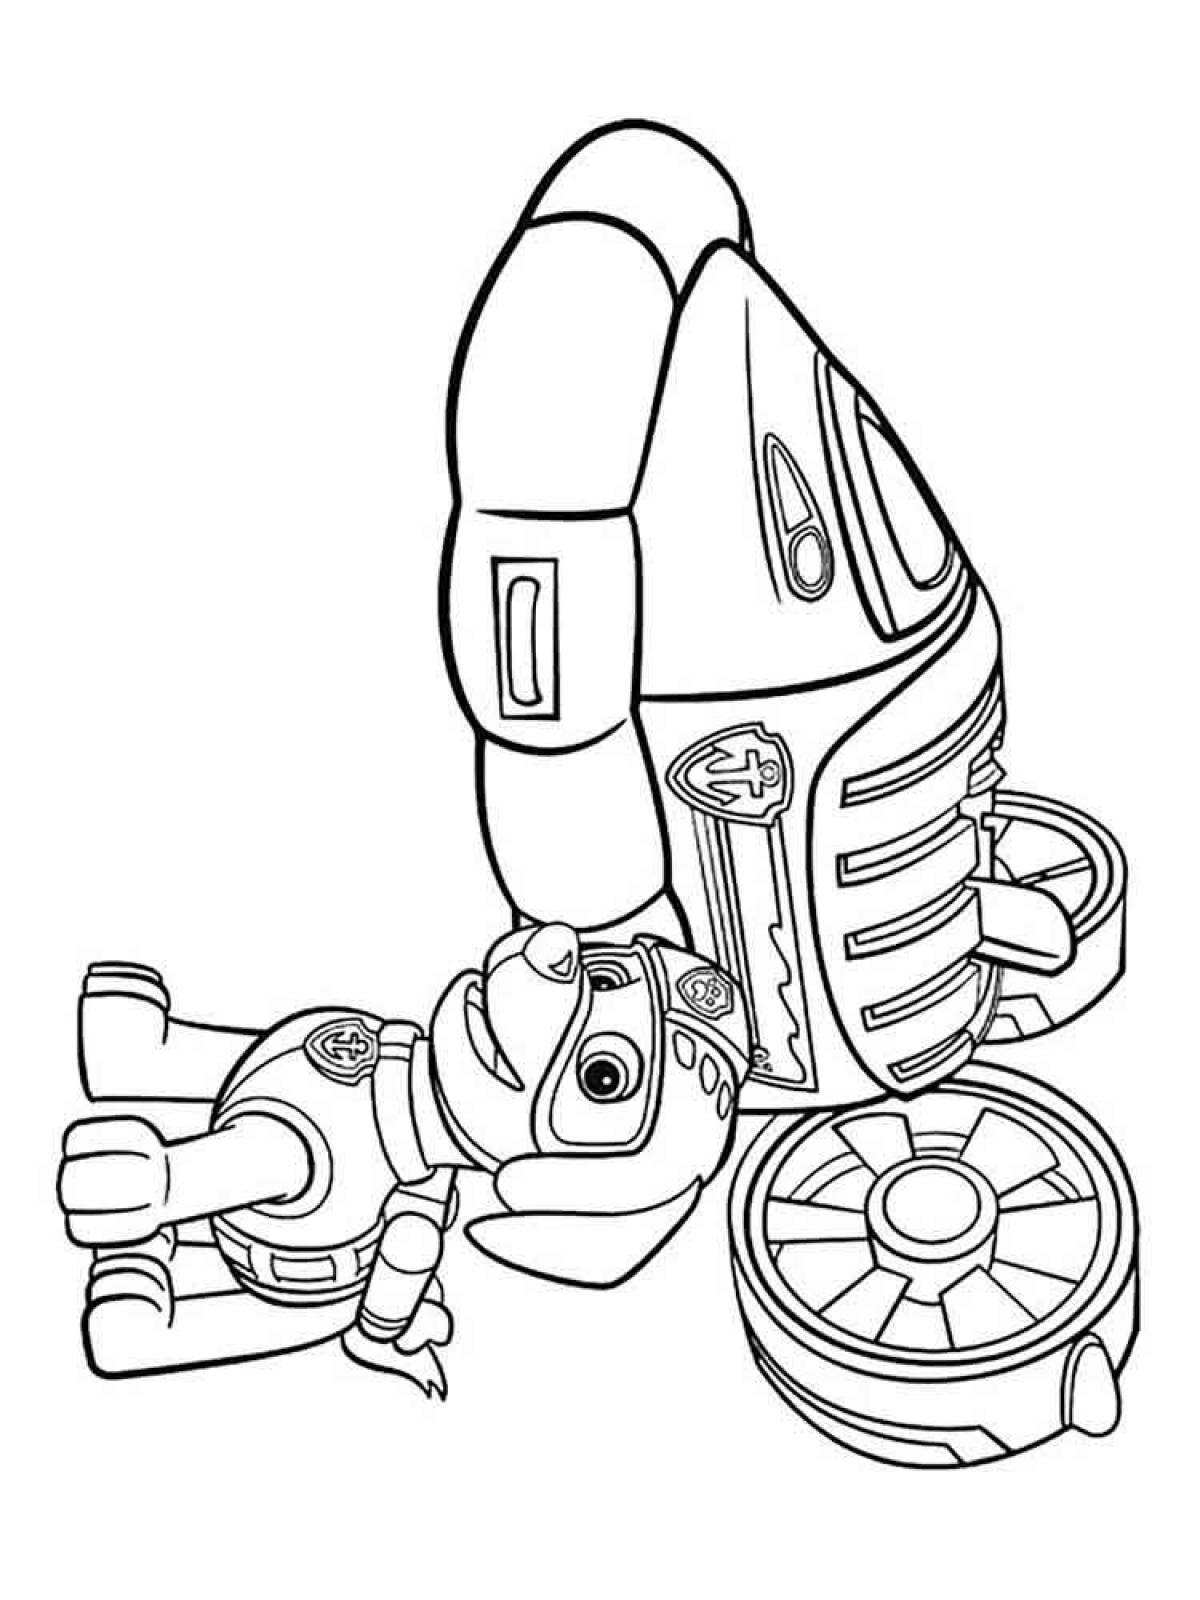 Amazing zoom coloring page